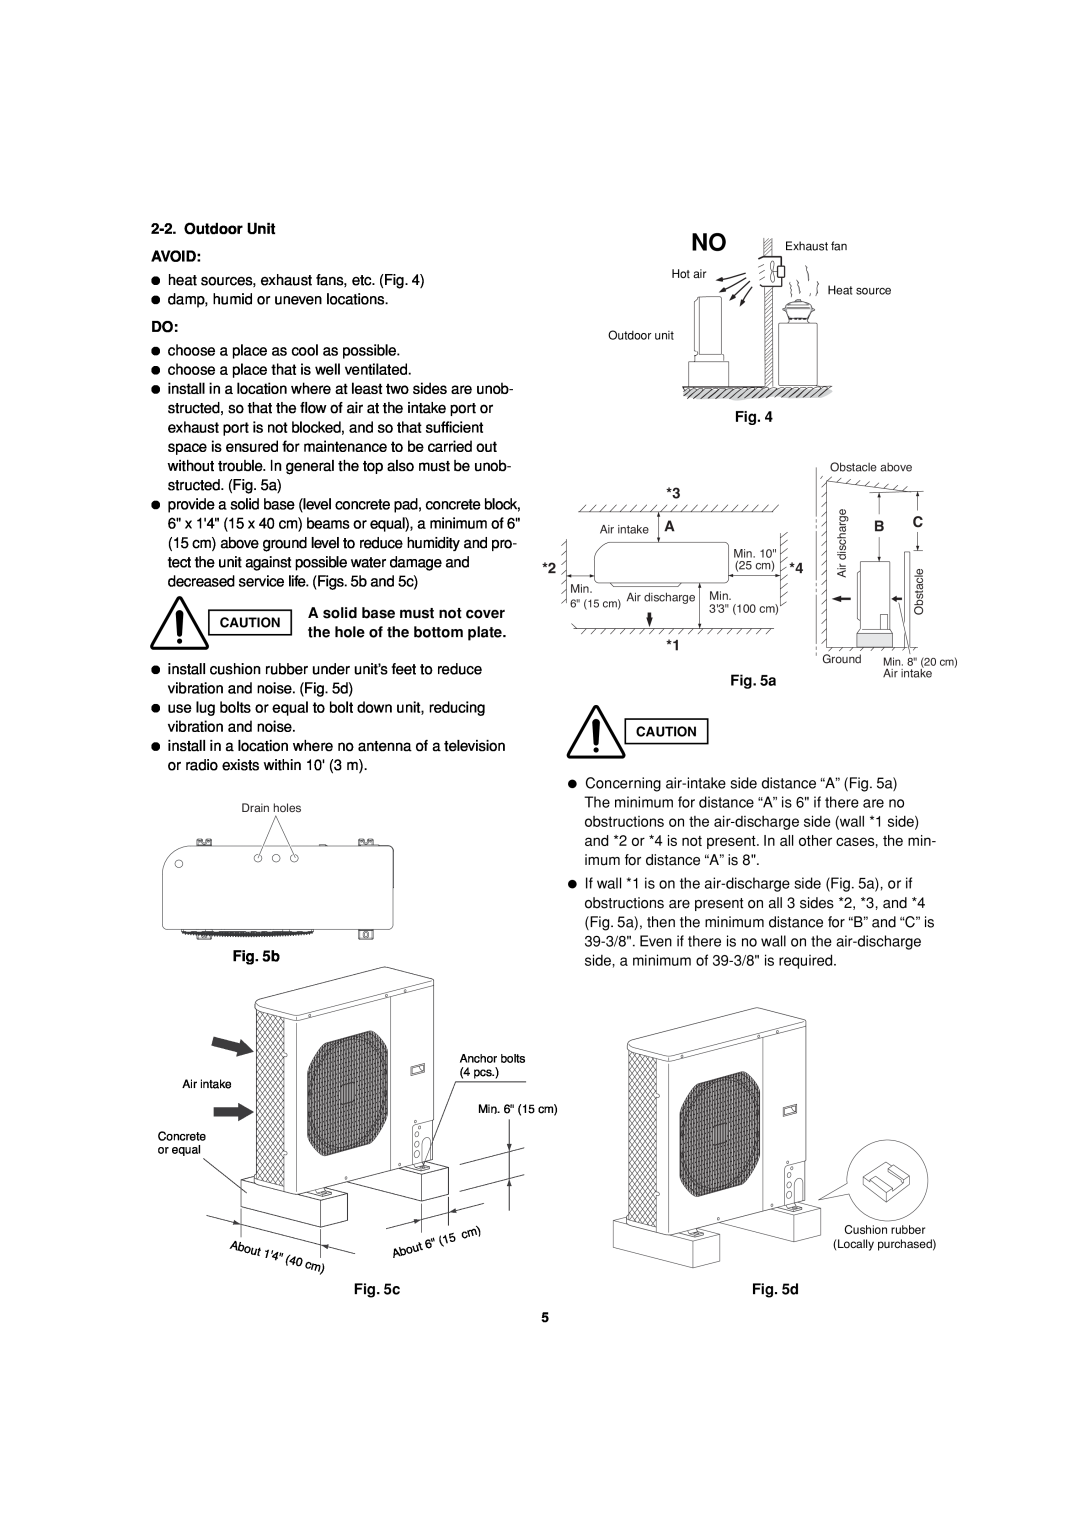 Sanyo C3682, C3082 service manual Outdoor Unit AVOID, A solid base must not cover the hole of the bottom plate 